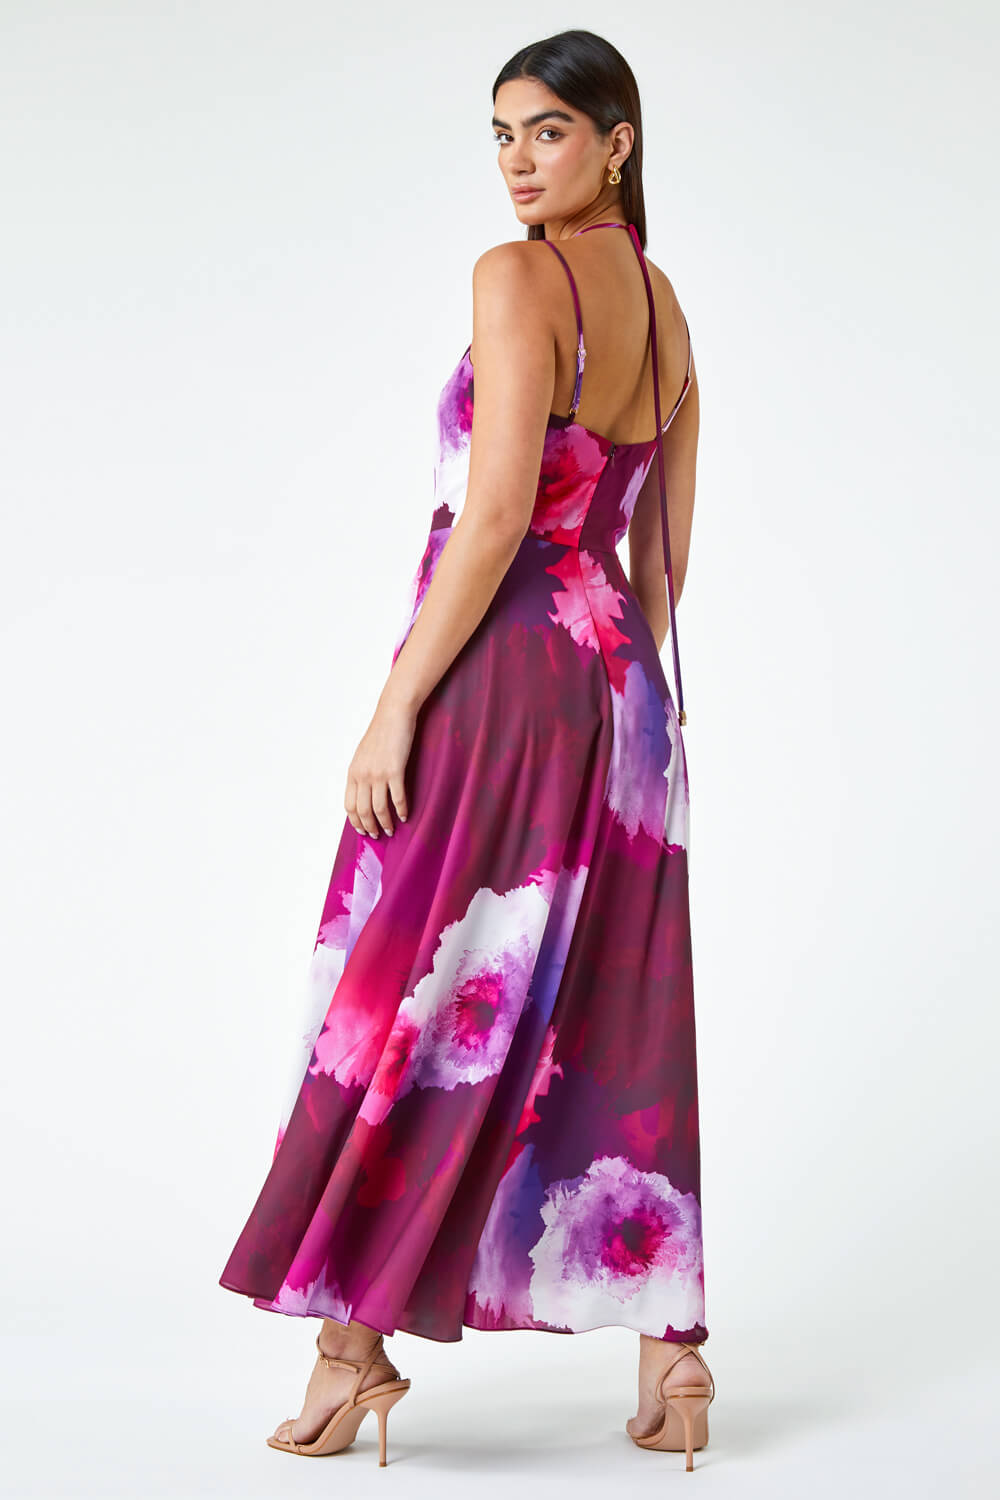 MAGENTA Luxe Floral Fit & Flare Maxi Dress, Image 3 of 5